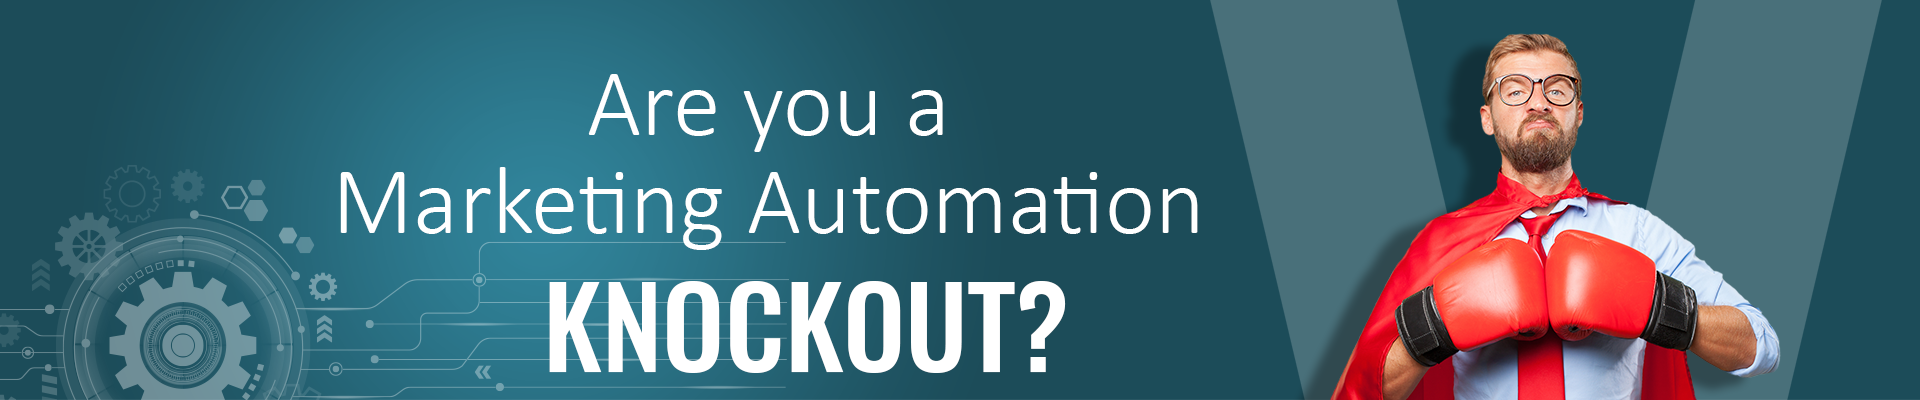 Are you a Marketing Automation knockout?